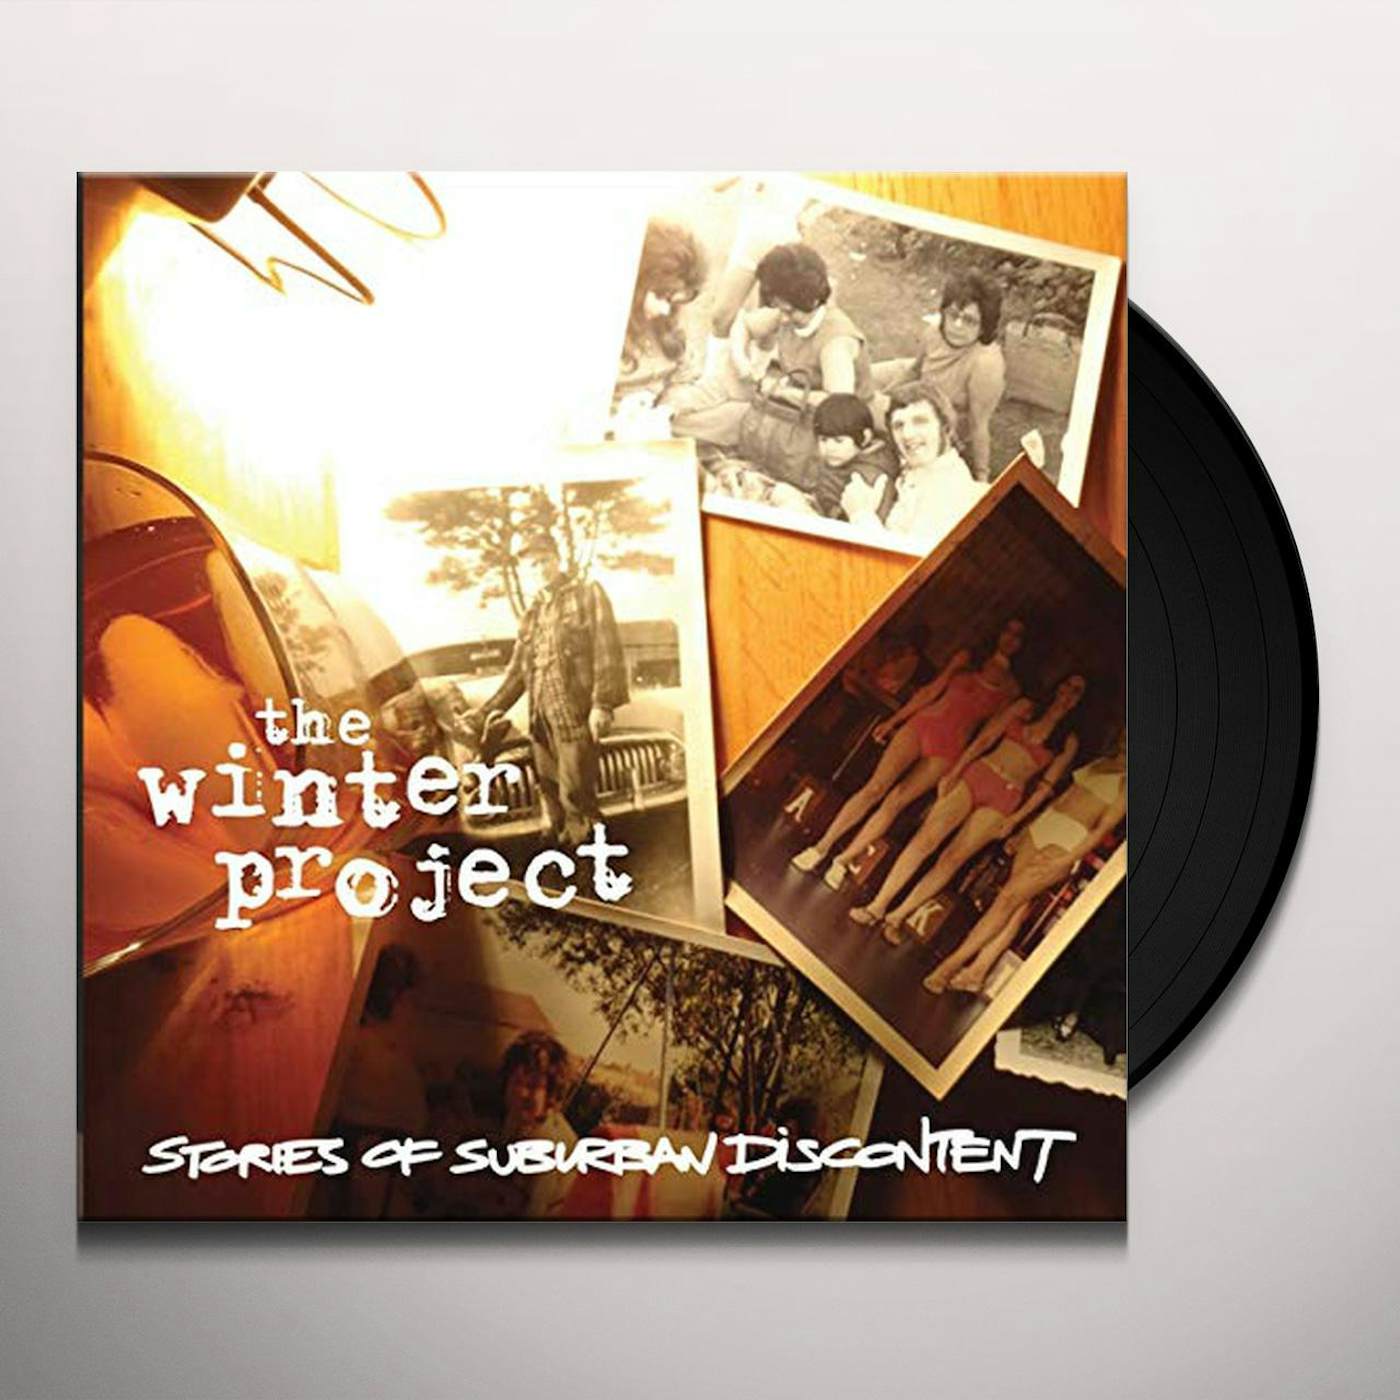 The Winter Project Stories of Suburban Discontent Vinyl Record